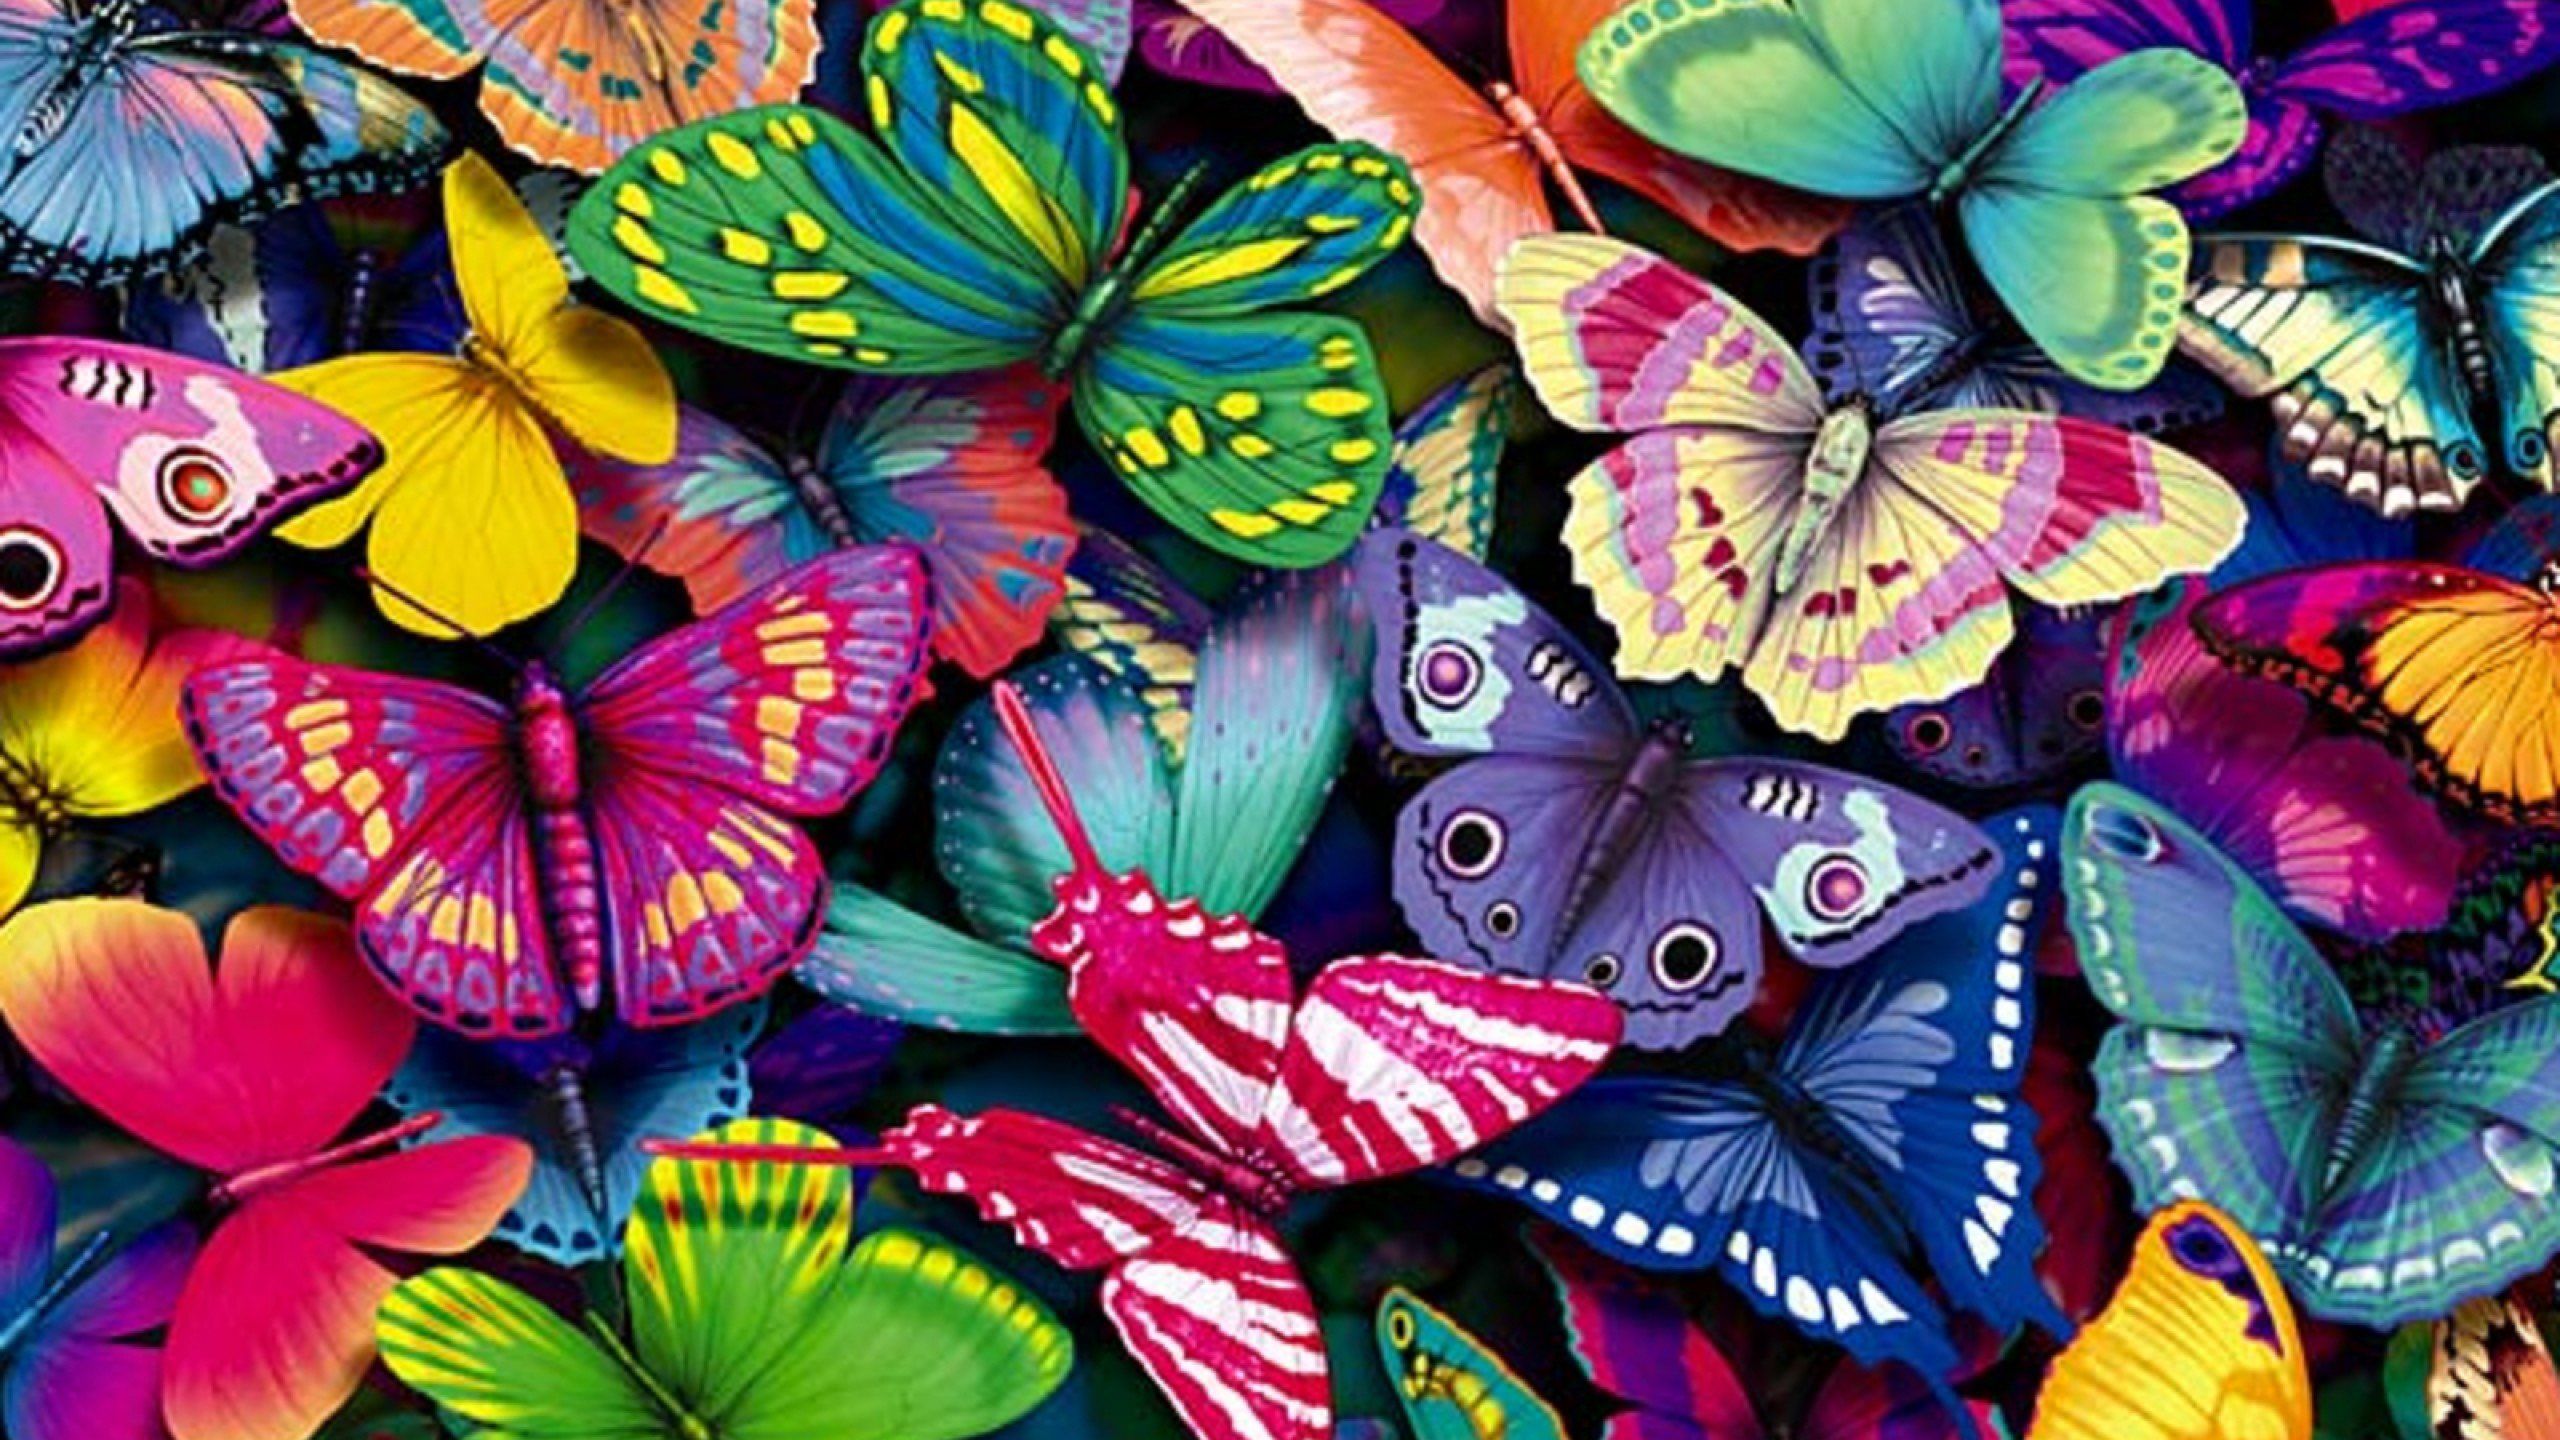 Free download Cool Wallpaper HD with Colorful Butterfly in Cartoon HD Wallpaper [2560x1440] for your Desktop, Mobile & Tablet. Explore Cool Cartoon Wallpaperd Cartoon Wallpaper, Cartoon Wallpaper Free